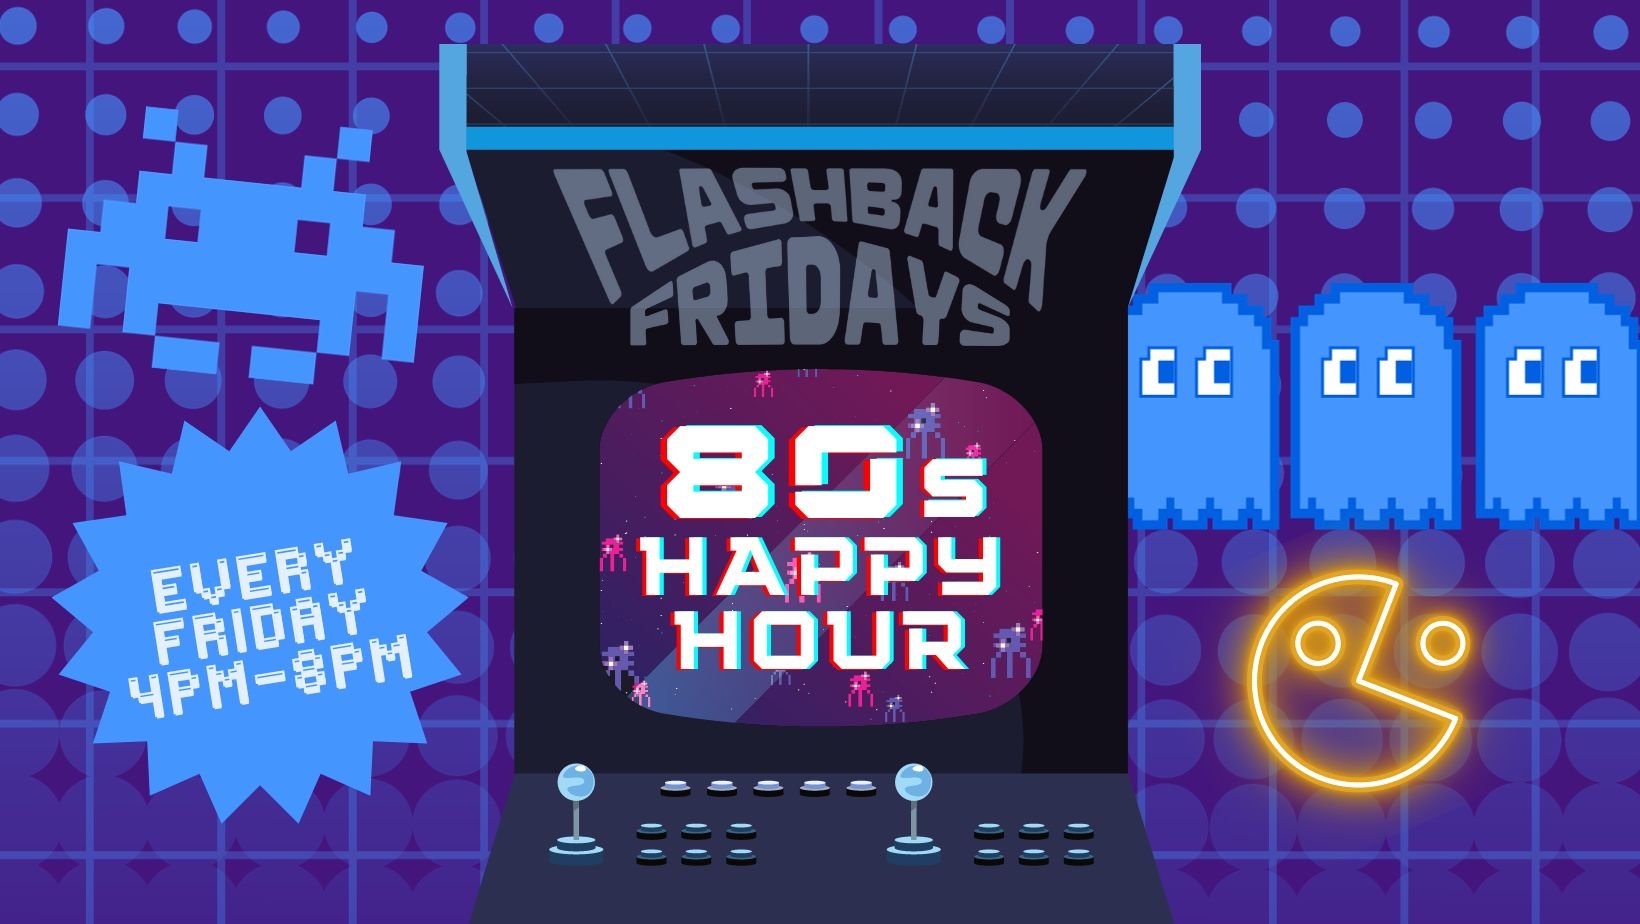 Flashback Friday: 80s Happy Hour - Replay Lincoln Park - Bar in Chicago, IL